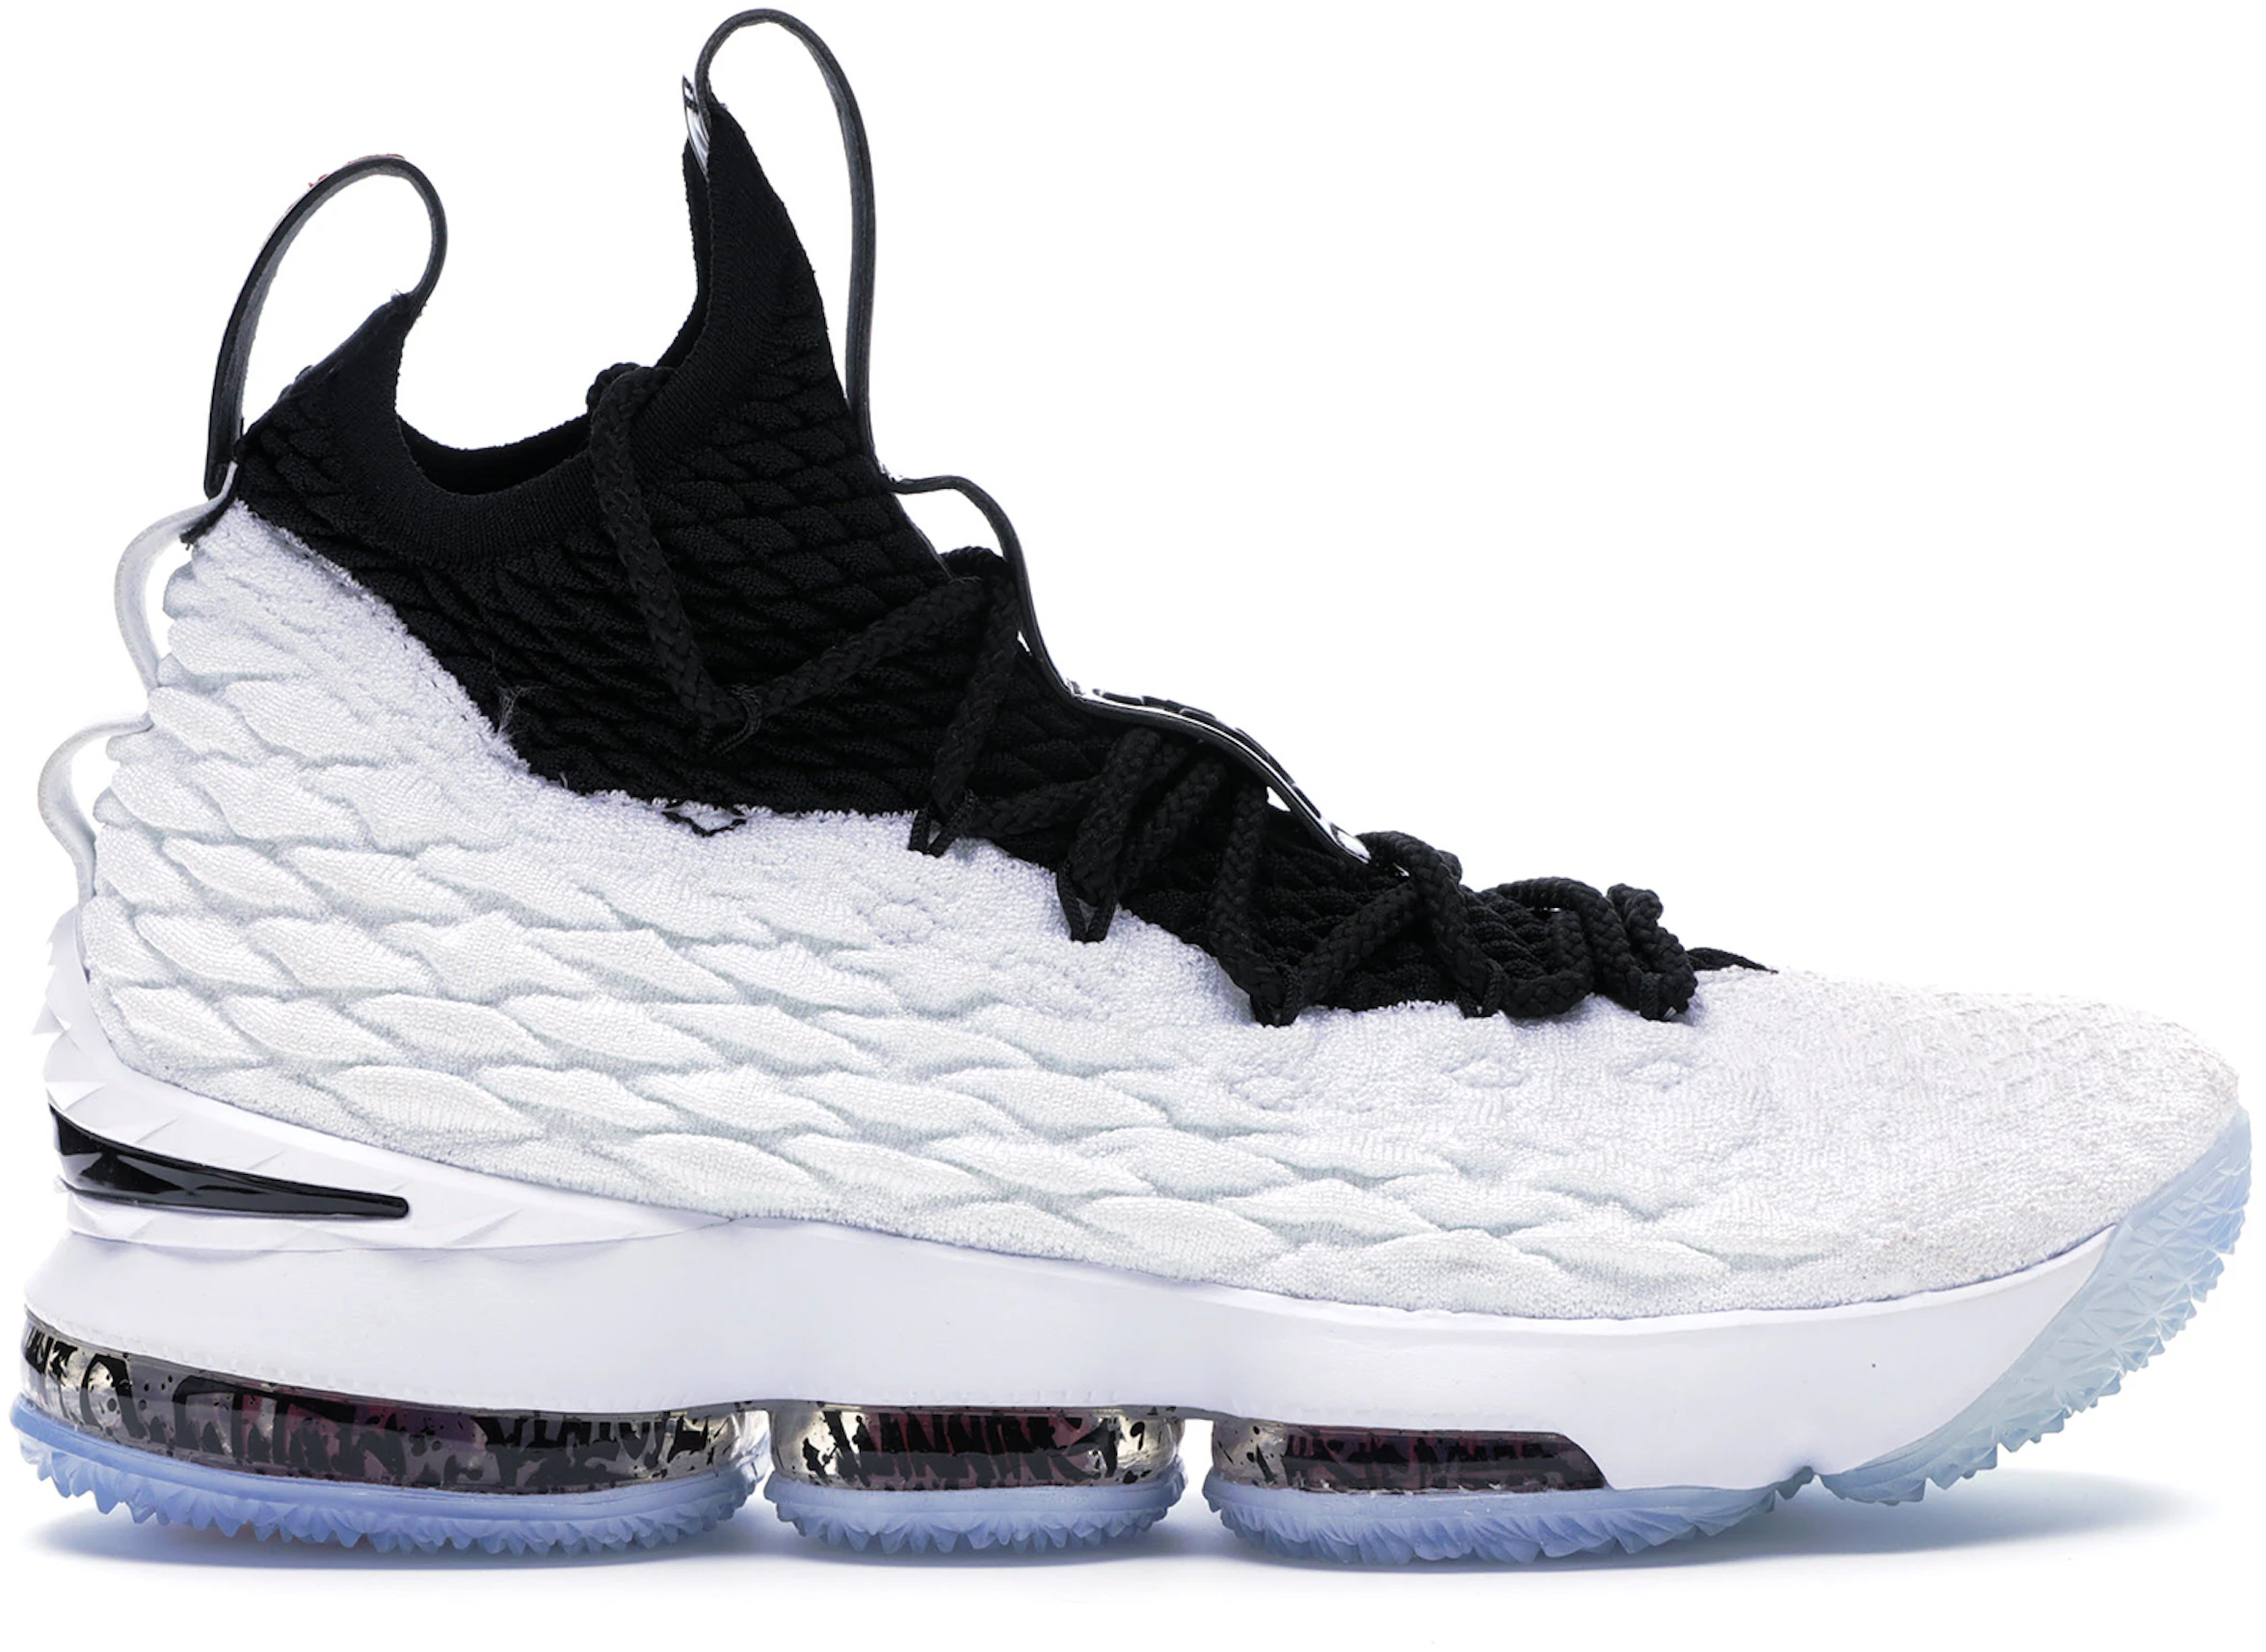 Lebron 15 - All Sizes & Colorways at StockX